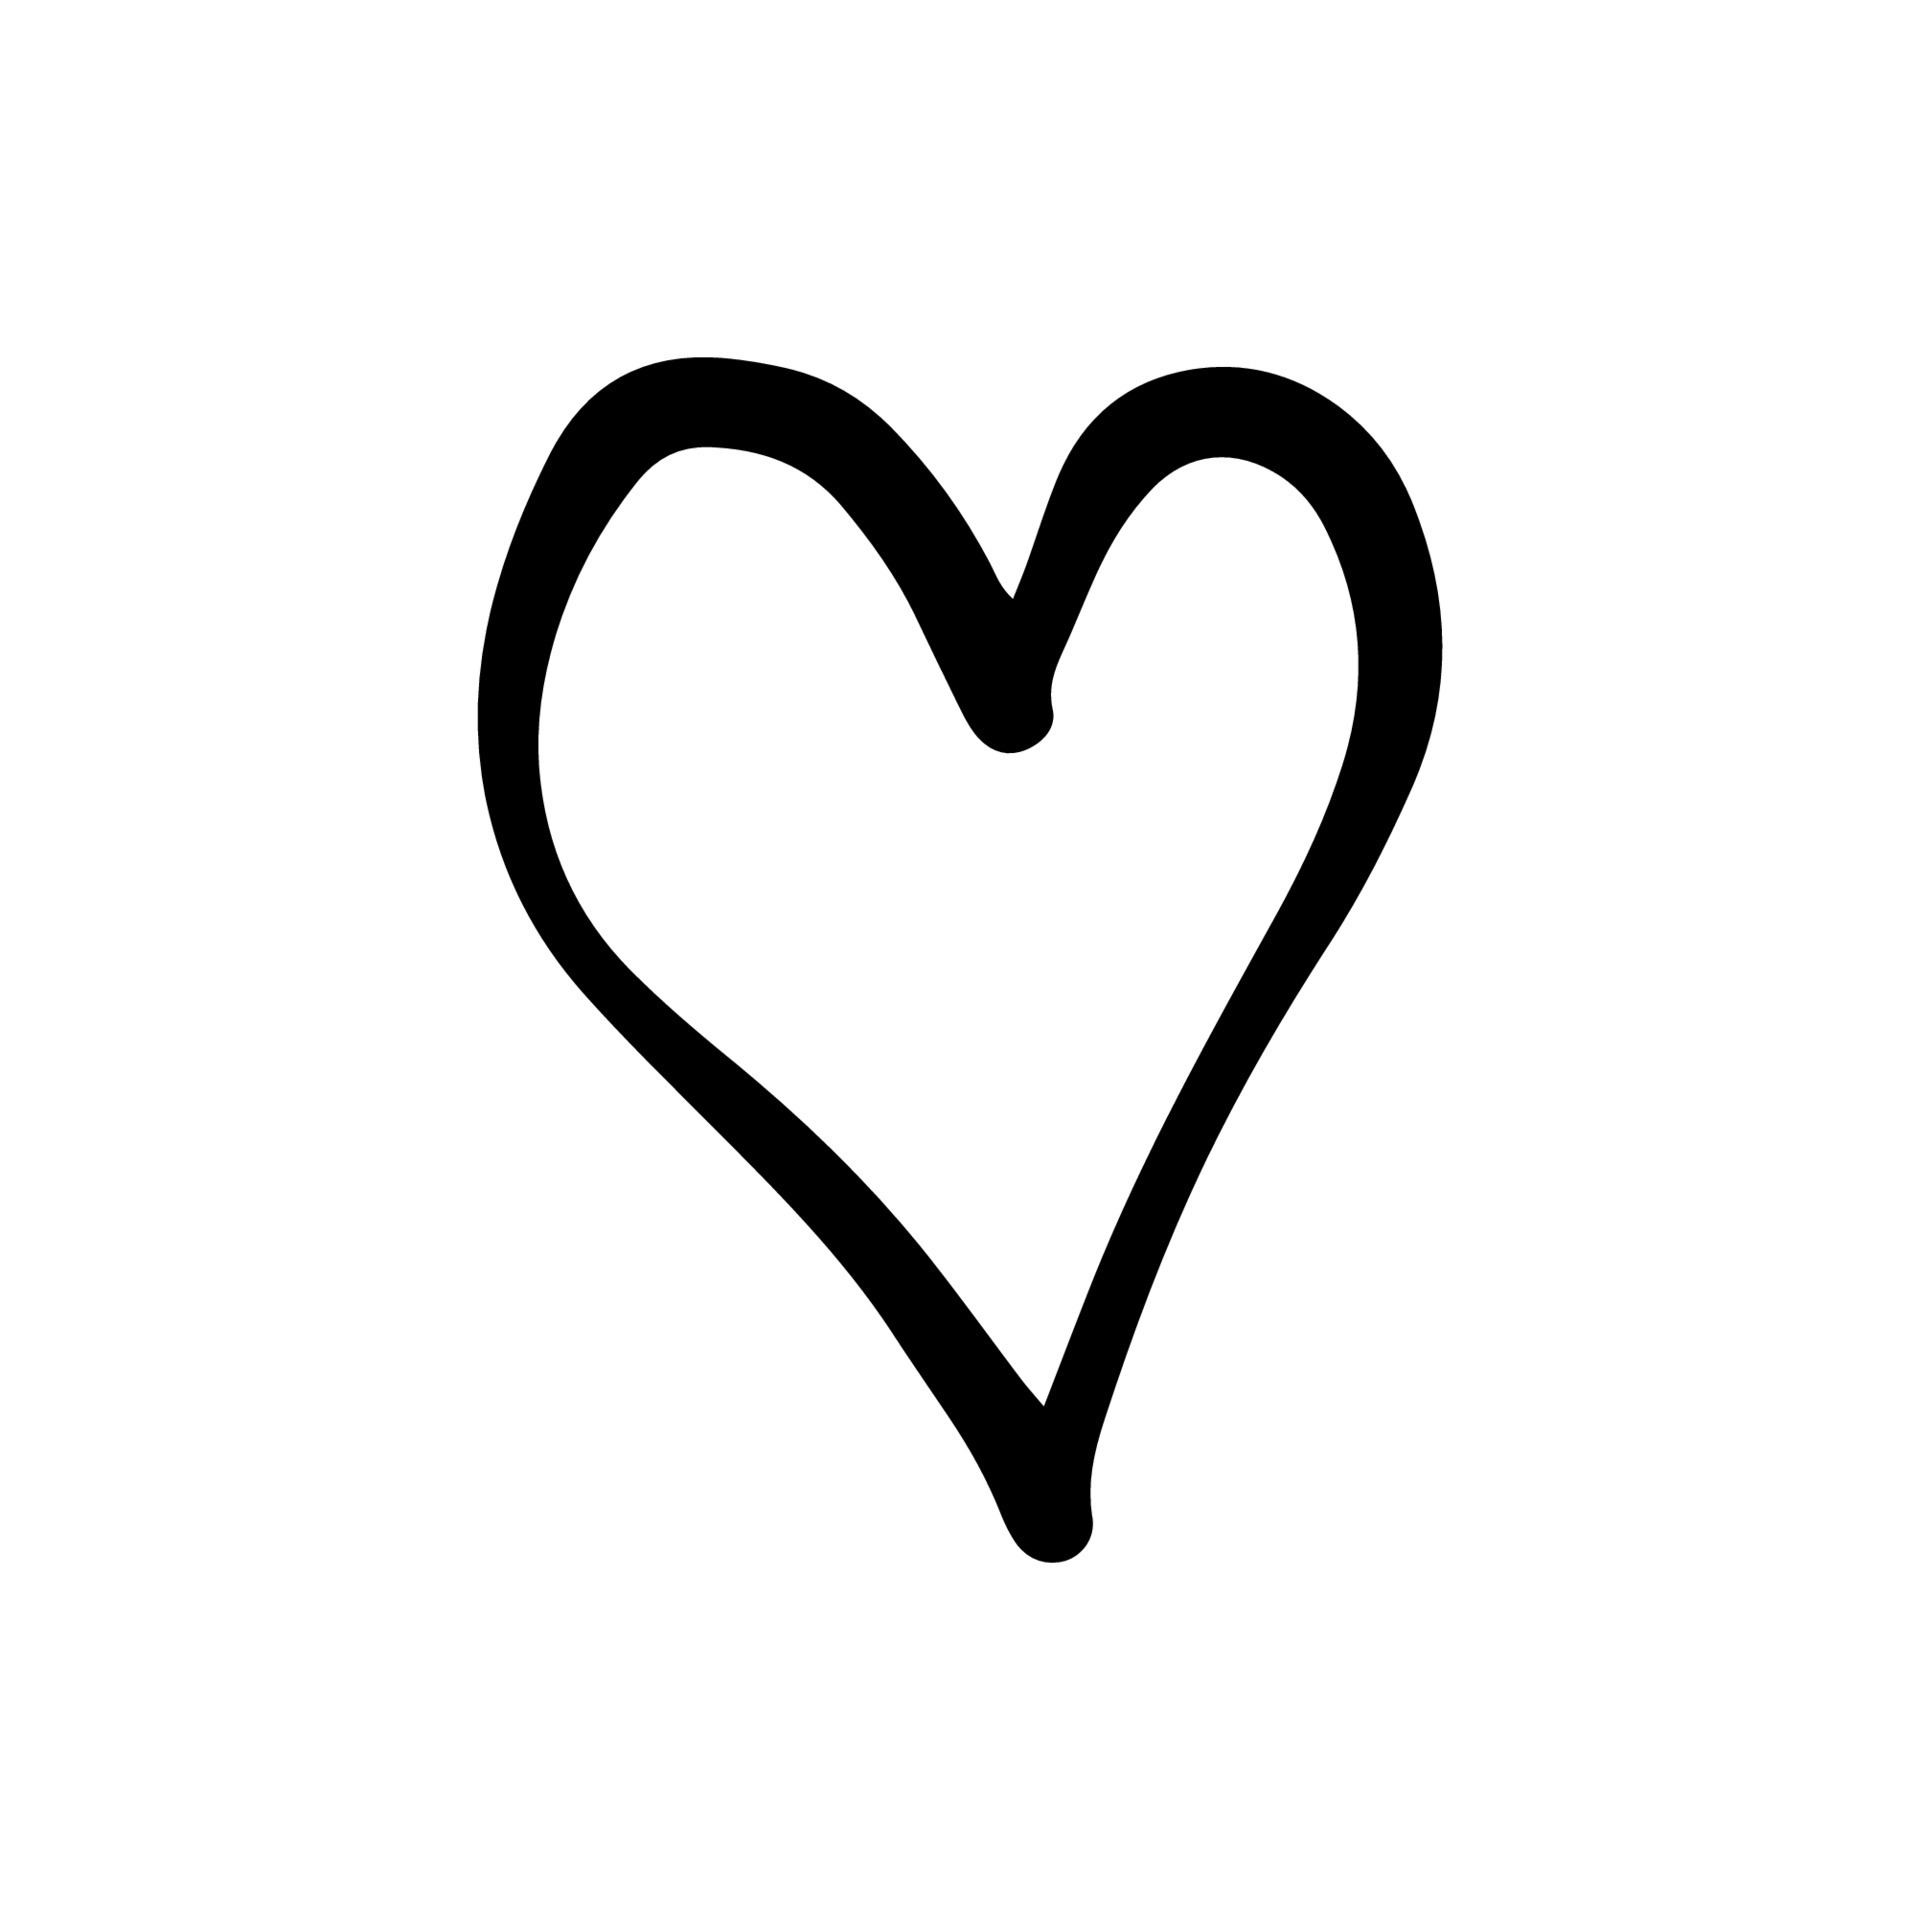 Heart in doodle style. Symbol of Valentine's Day and love. Shapes For ...